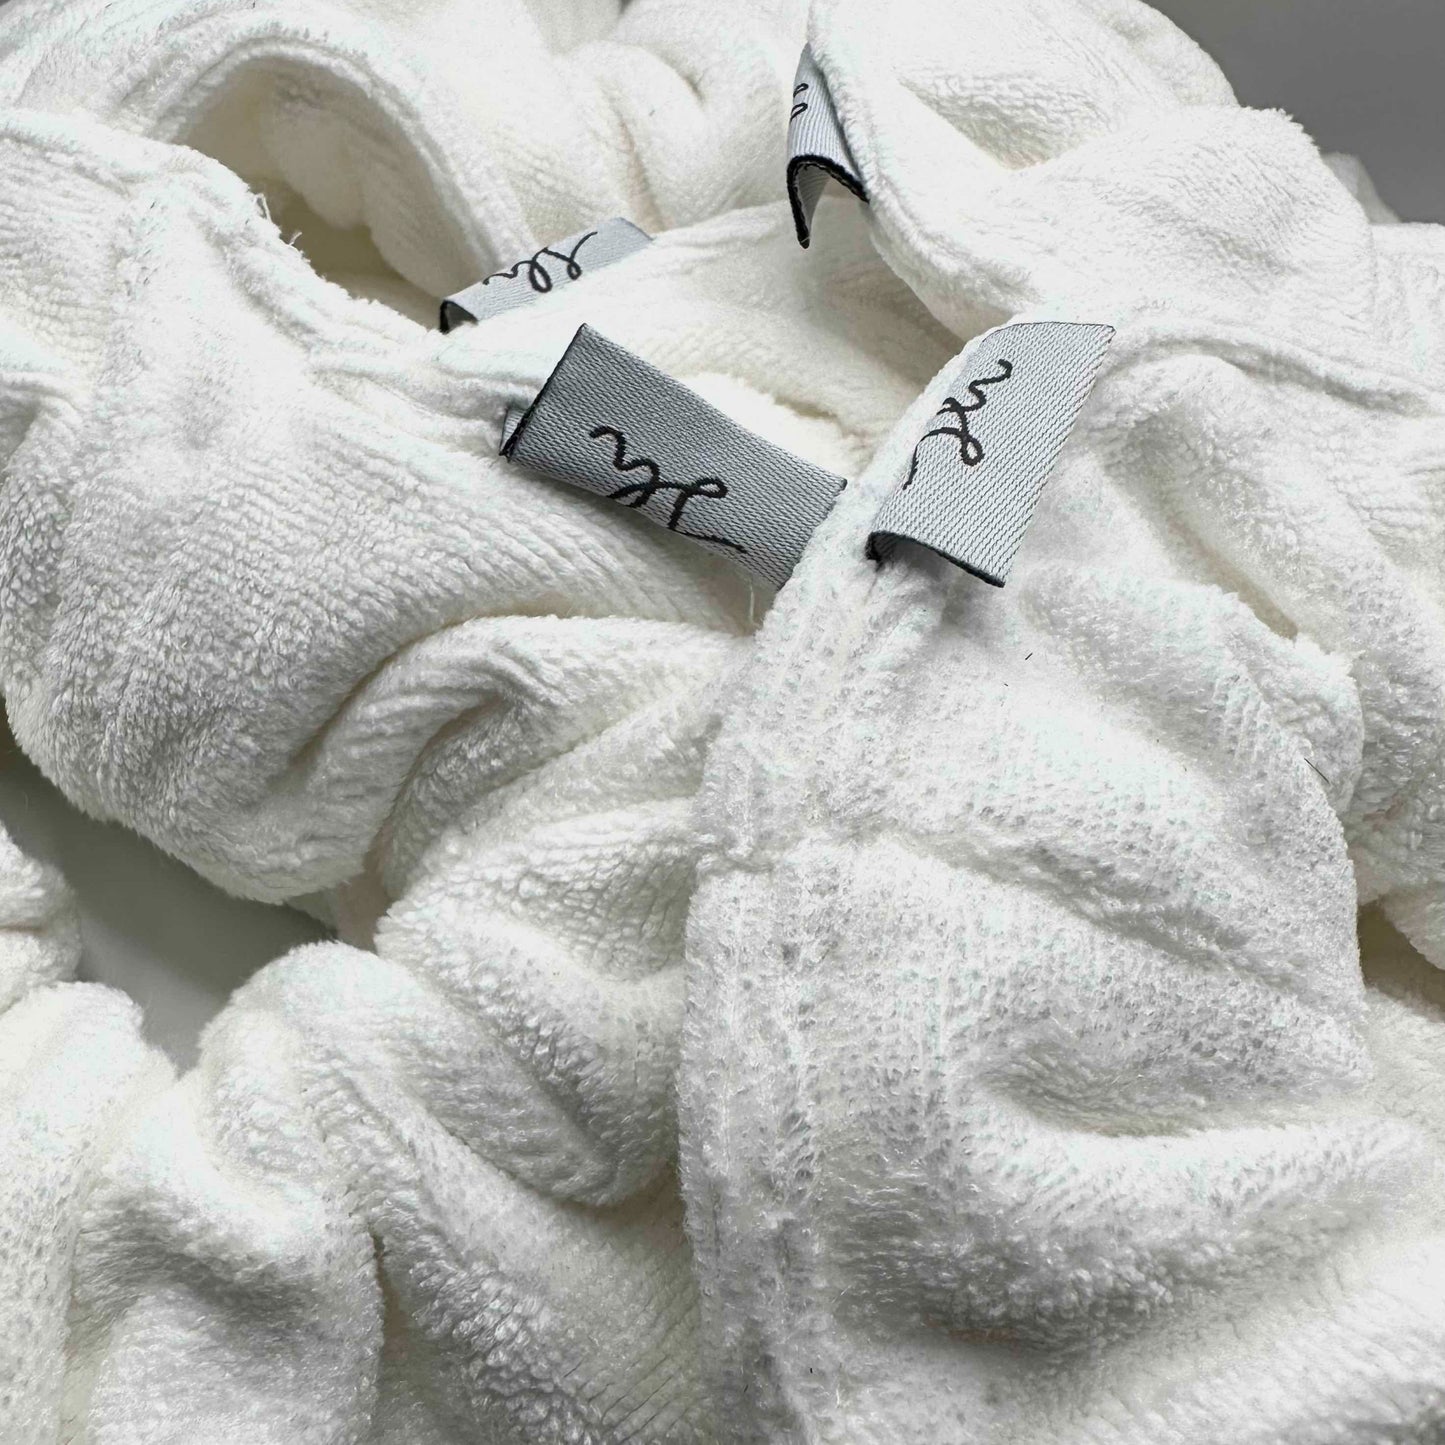 Microfibre towel scrunchie in white. Up close image shot with label in view